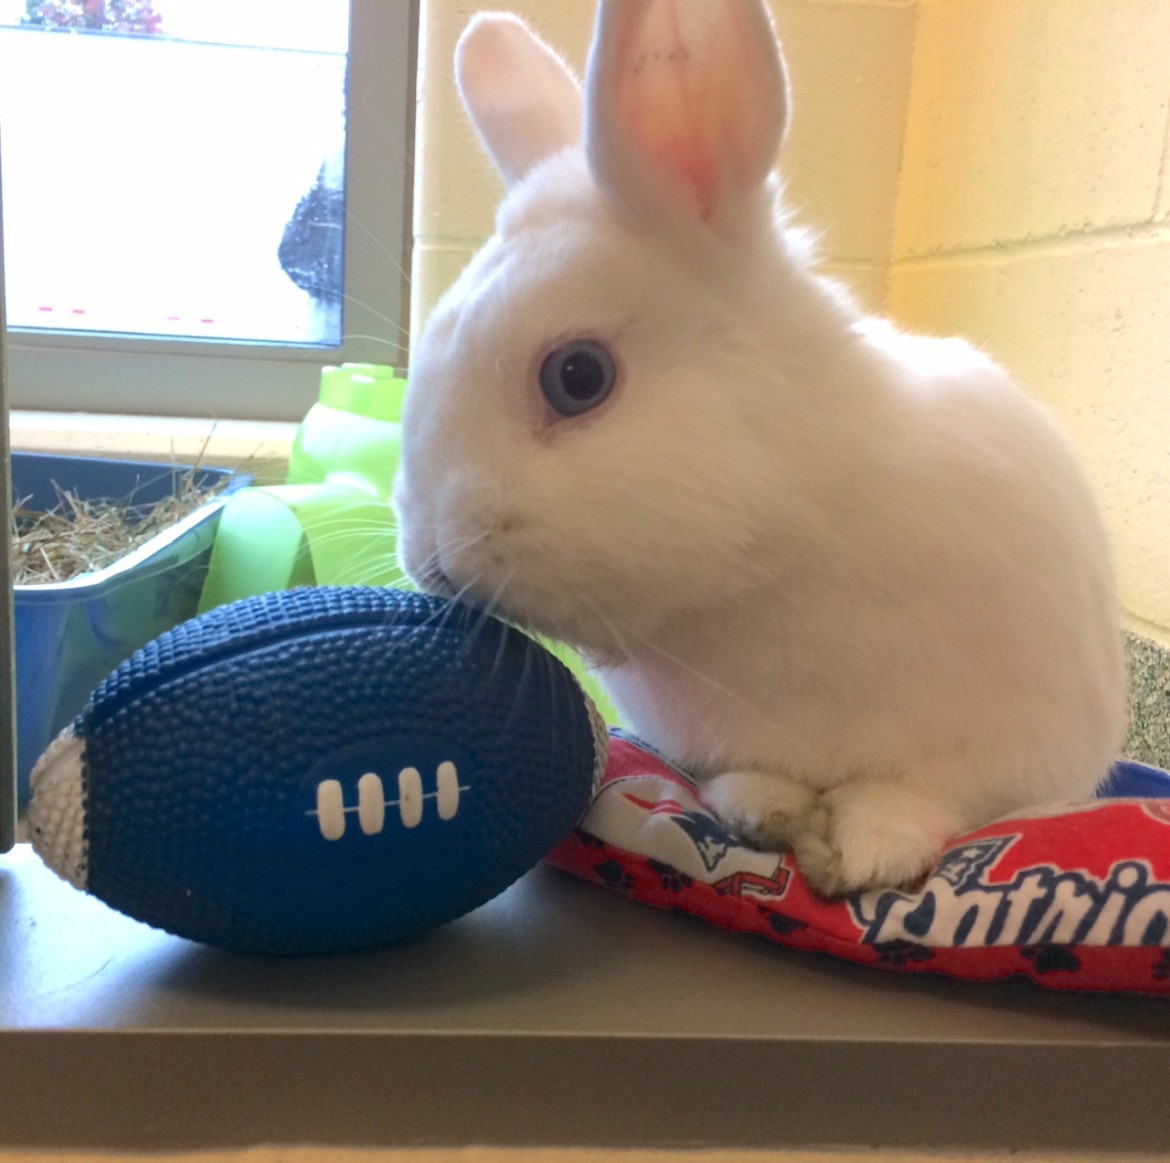 One-year-old-male-rabbit-Sugar-is-awaiting-adoption-at-the-MSPCA-Angell-in-Boston-credit-MSPCA-Angell-1170x1163.jpg